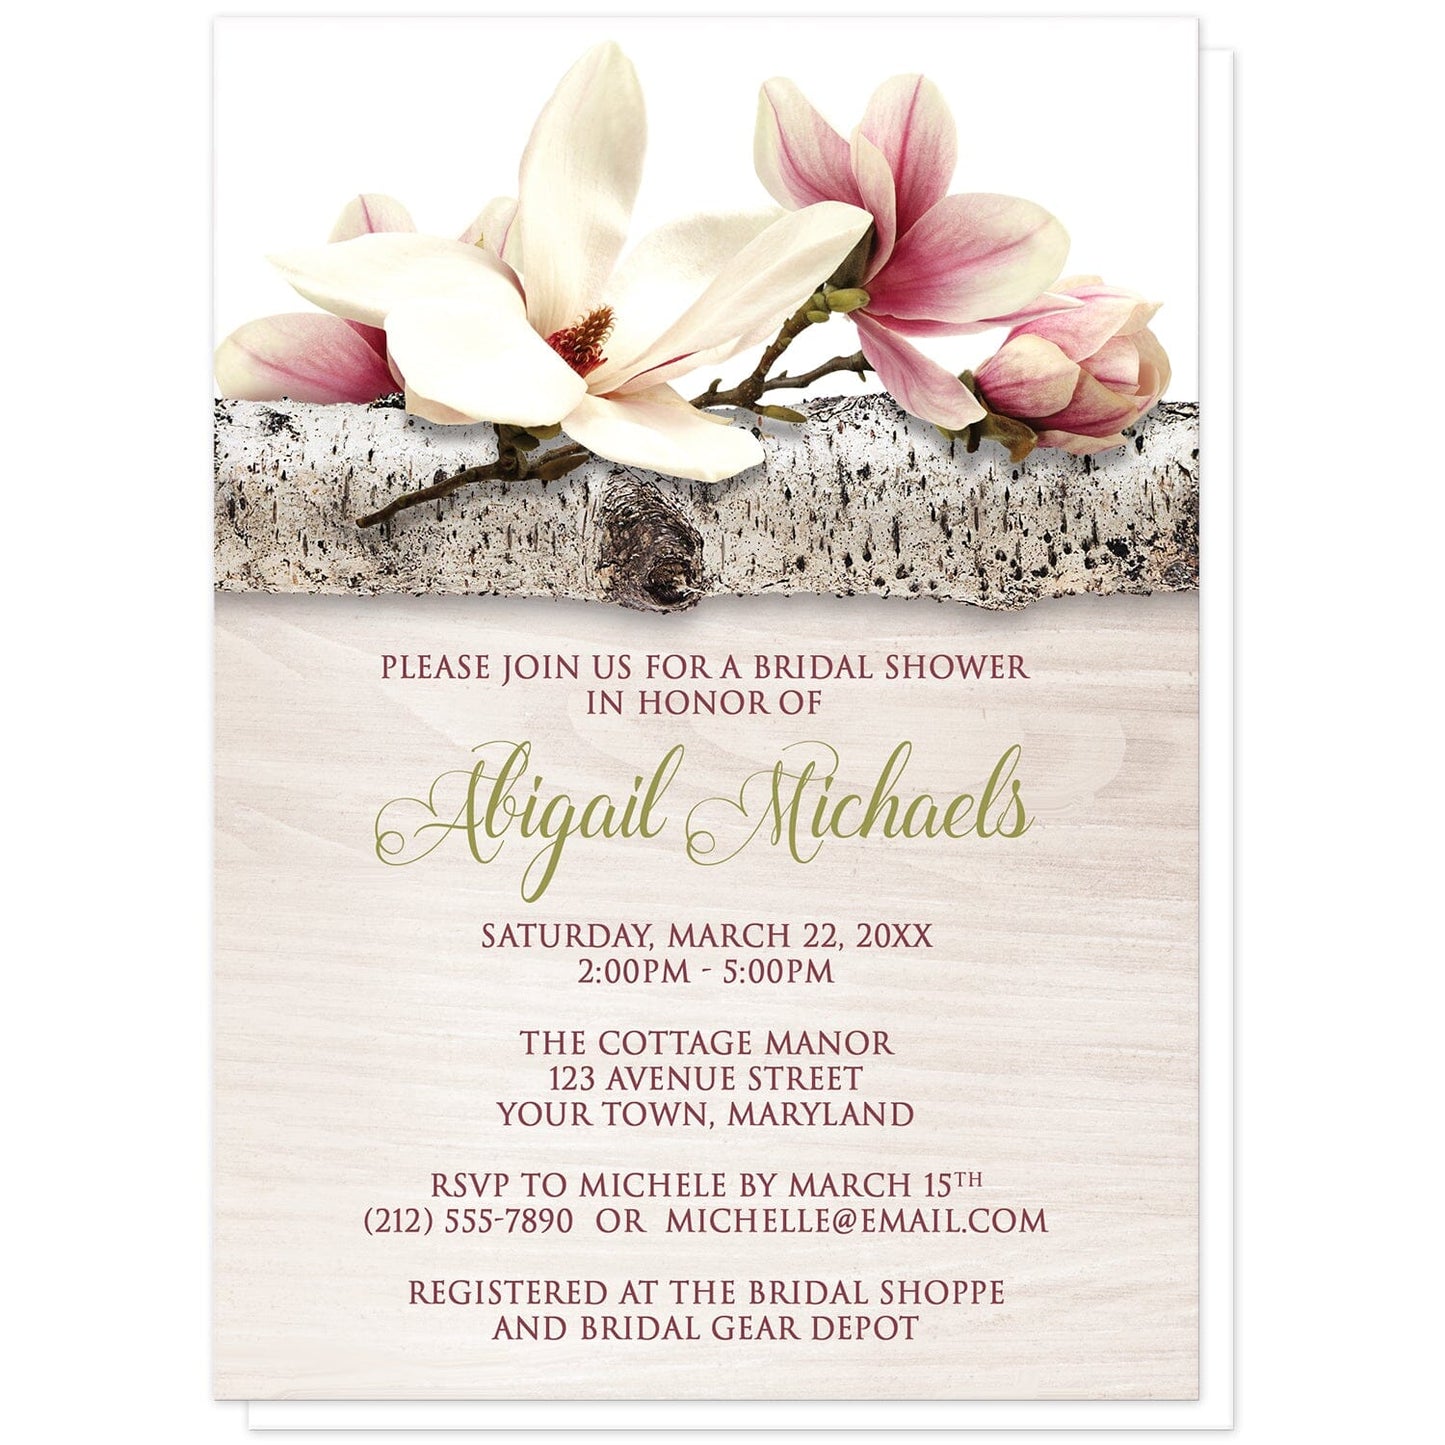 Magnolia Birch Light Wood Floral Bridal Shower Invitations at Artistically Invited. Beautiful magnolia birch light wood floral bridal shower invitations with pink and white magnolia flowers laying on a birch tree branch along the top. Your personalized bridal shower celebration details are custom printed in dark pink and light olive green over a light wood background illustration.